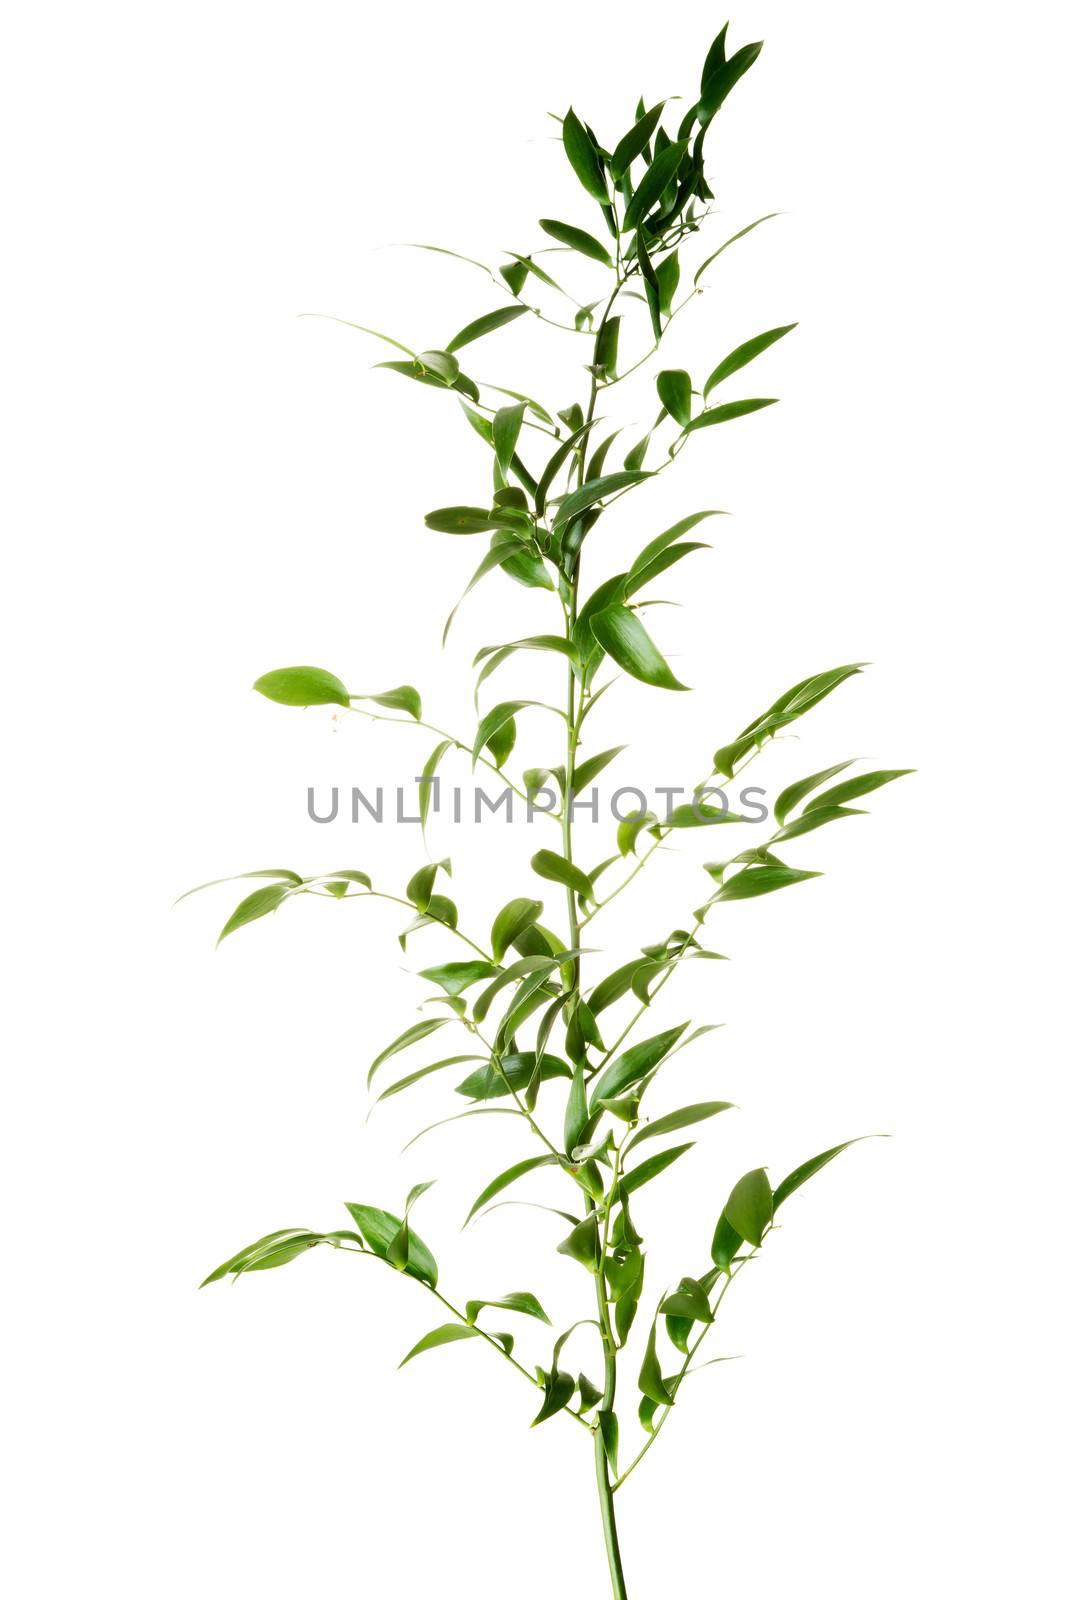 One green fresh plant. Isolated on white.